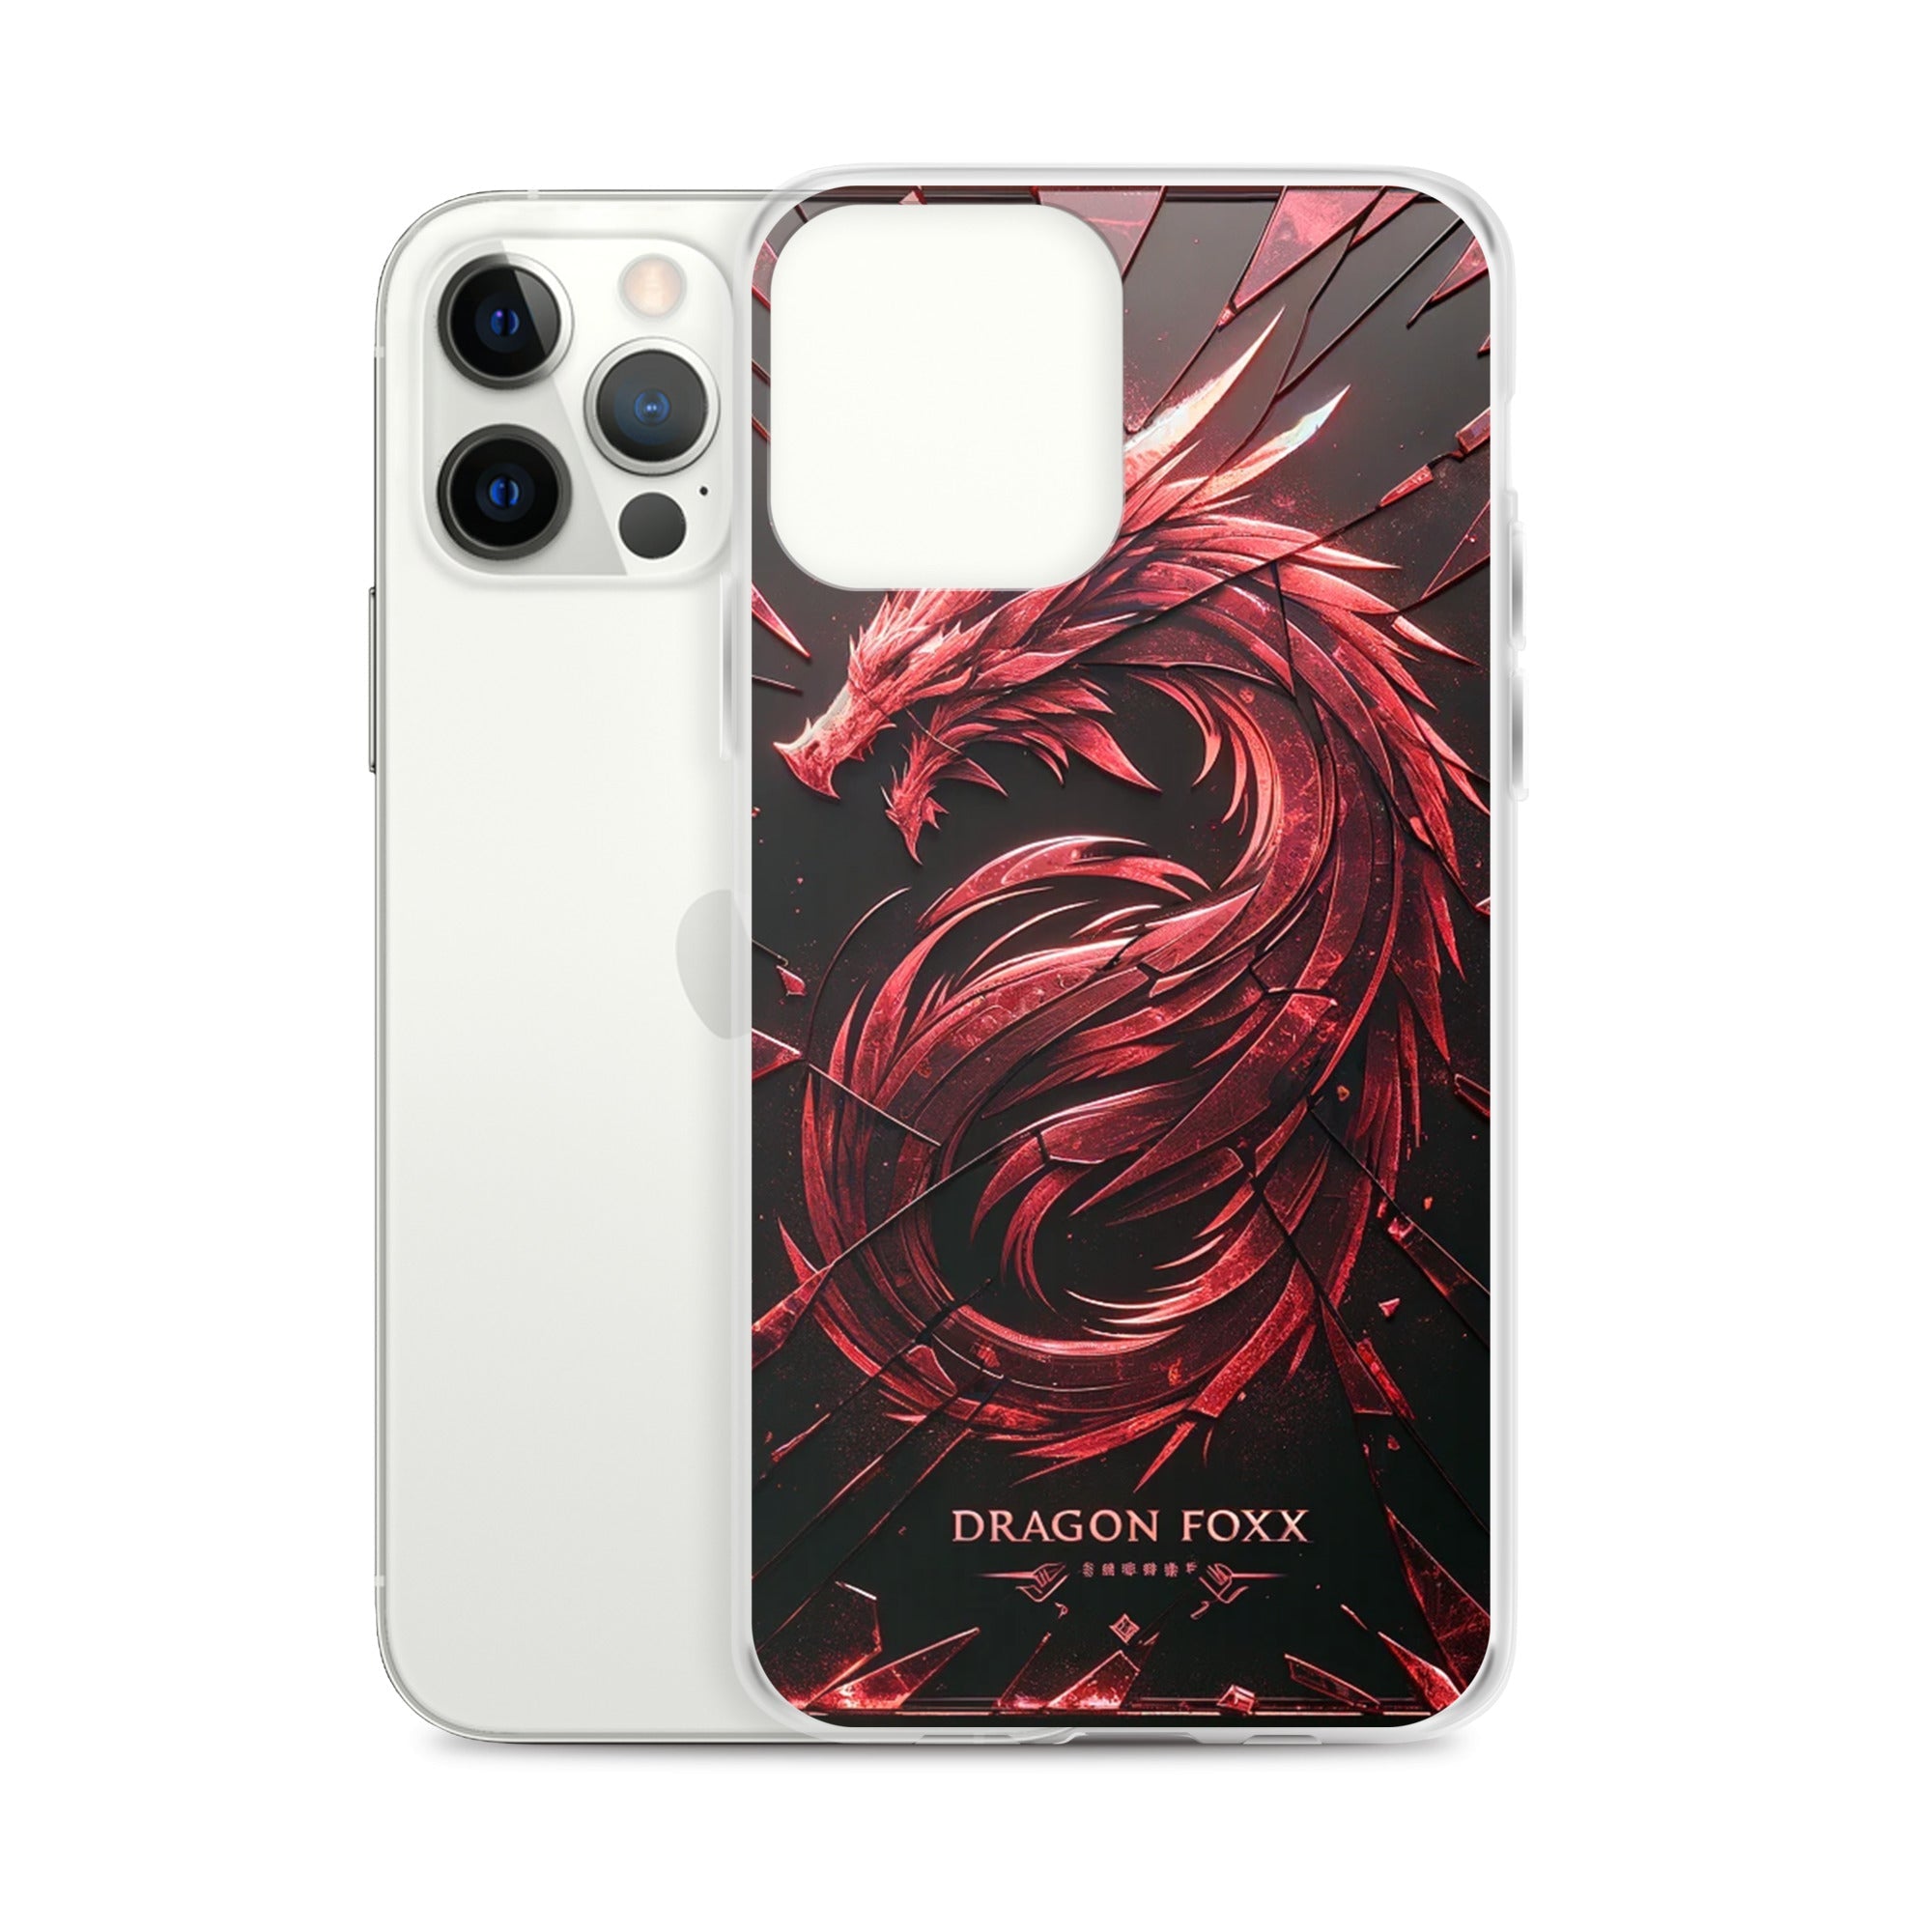 DRAGON FOXX™ Red Dragon Phone Case for iPhone® - Phone Case for iPhone® - DRAGON FOXX™ - DRAGON FOXX™ Red Dragon Phone Case for iPhone® - 7805351_11705 - iPhone 12 Pro Max - Red/Black/Clear - Accessories - Dragon Foxx™ - DRAGON FOXX™ Phone Case for iPhone®